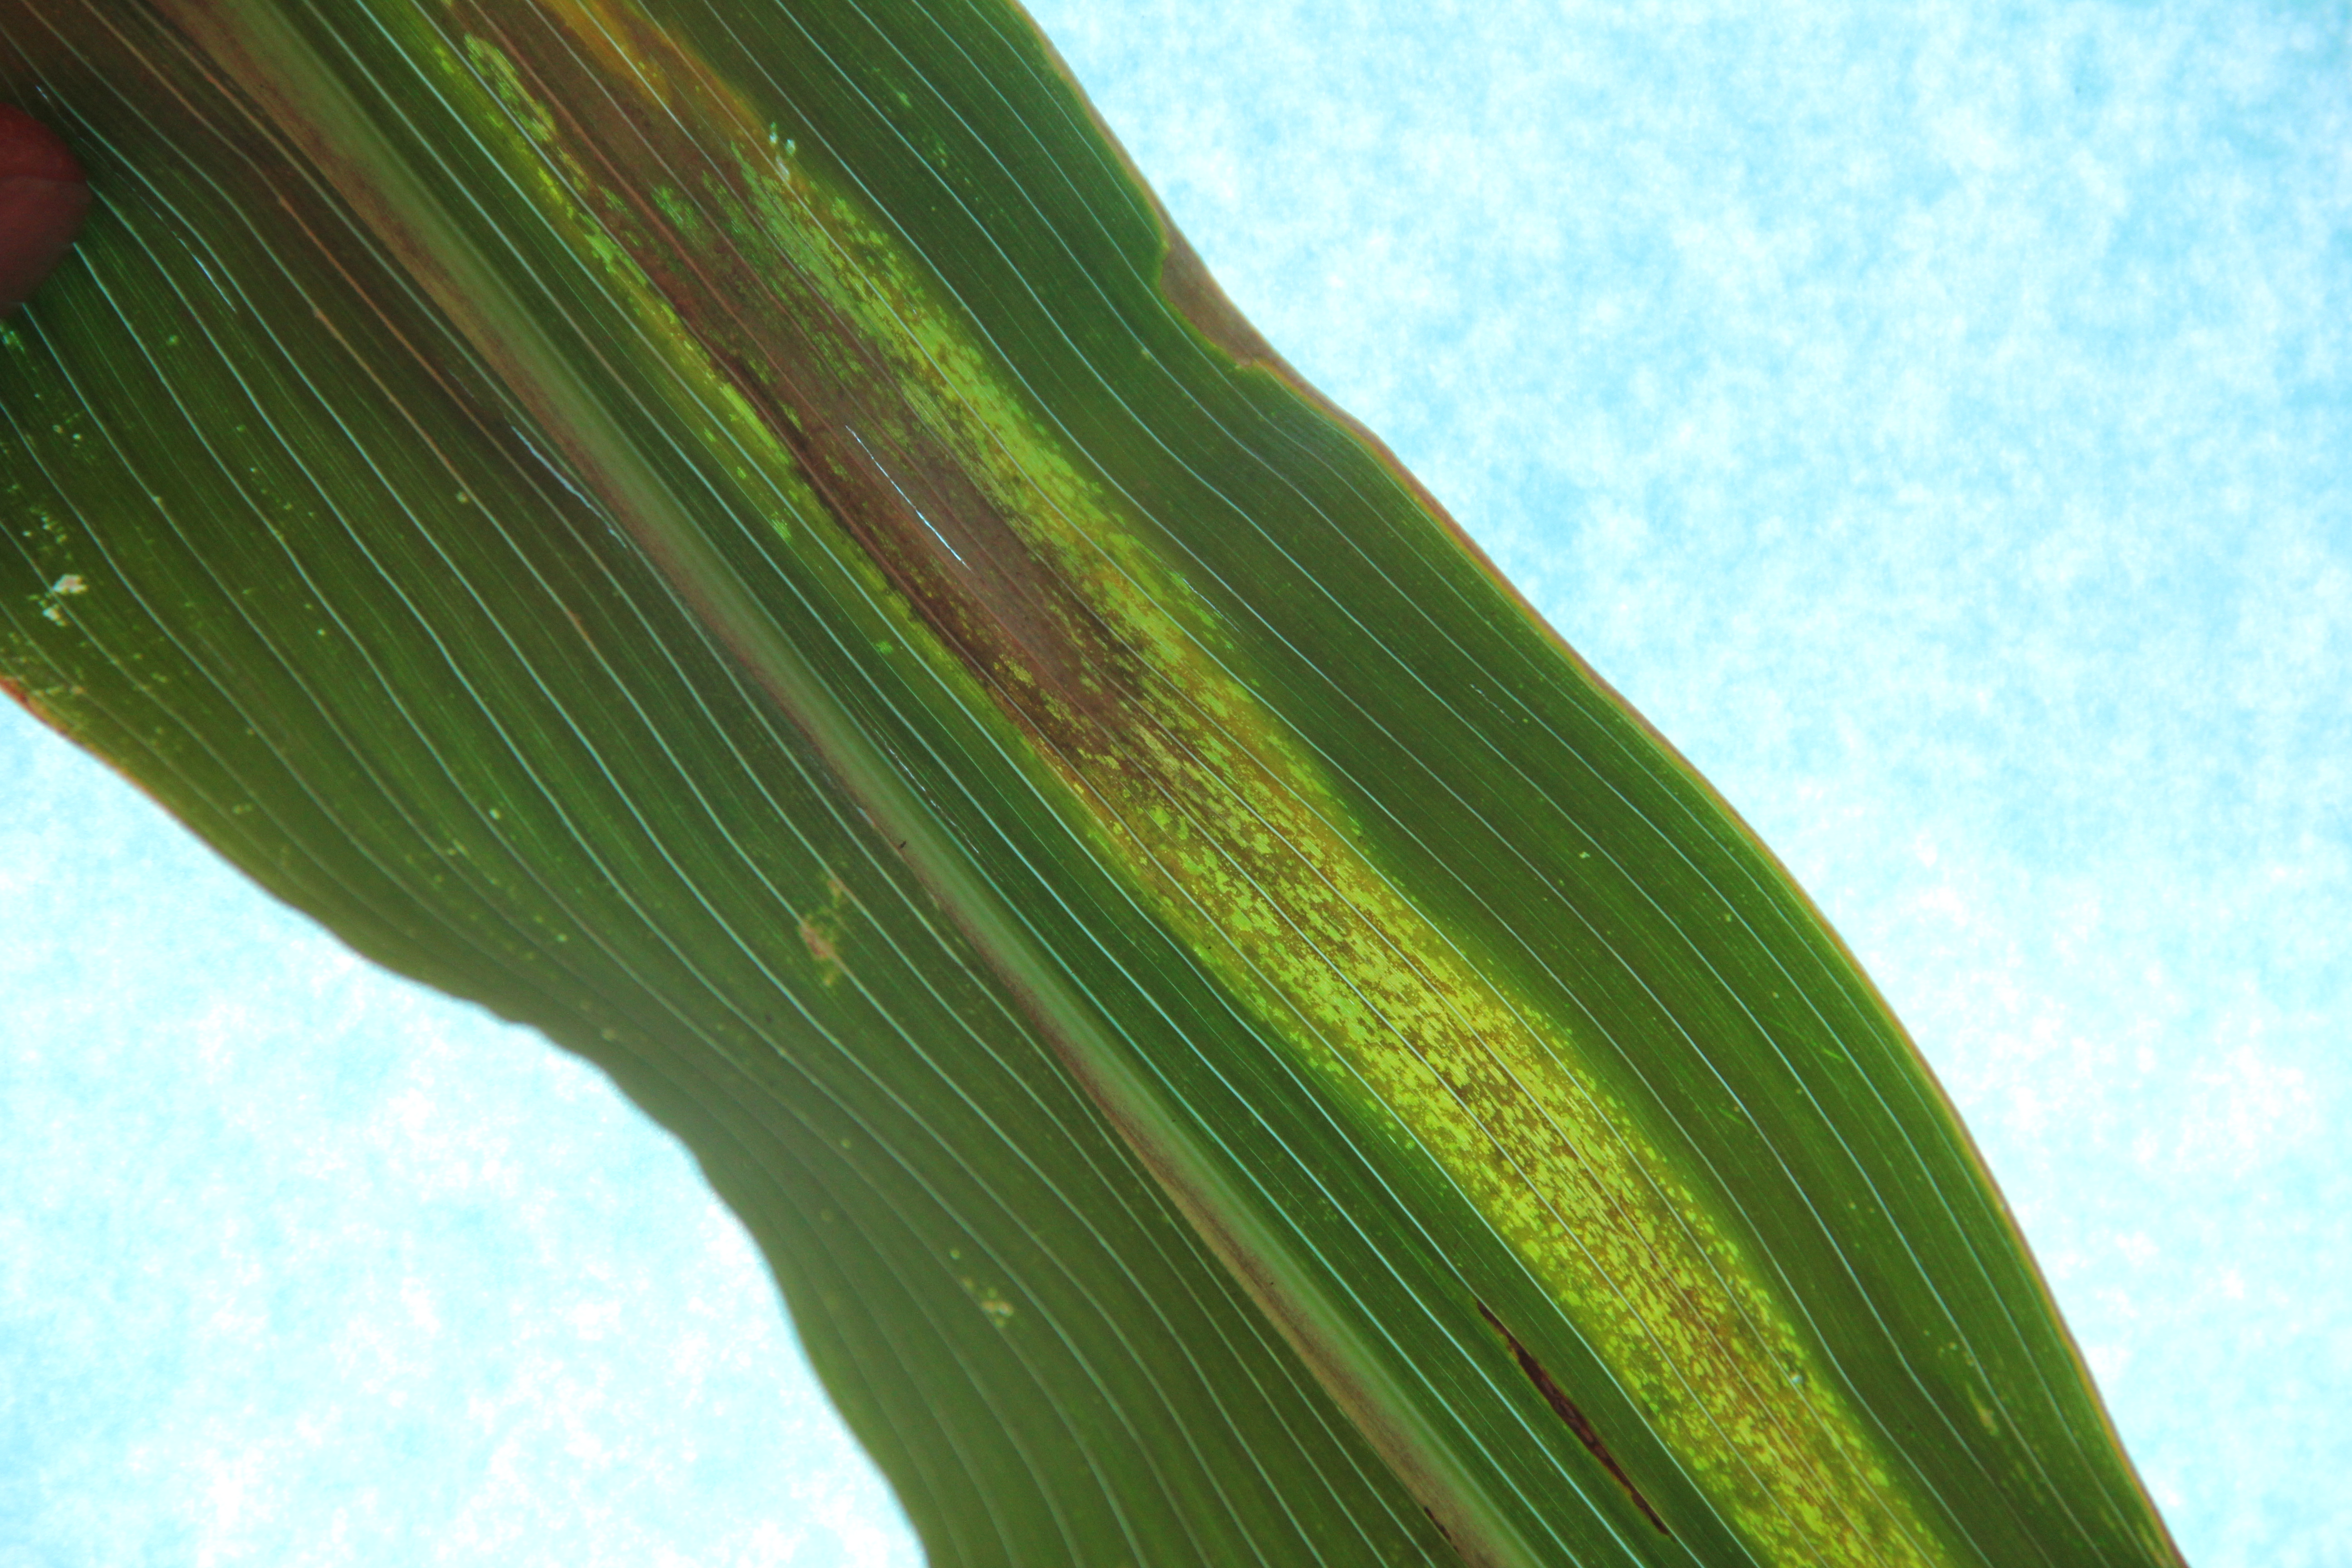 The freckles in a Goss's wilt lesion are transparent when held up to a light. 